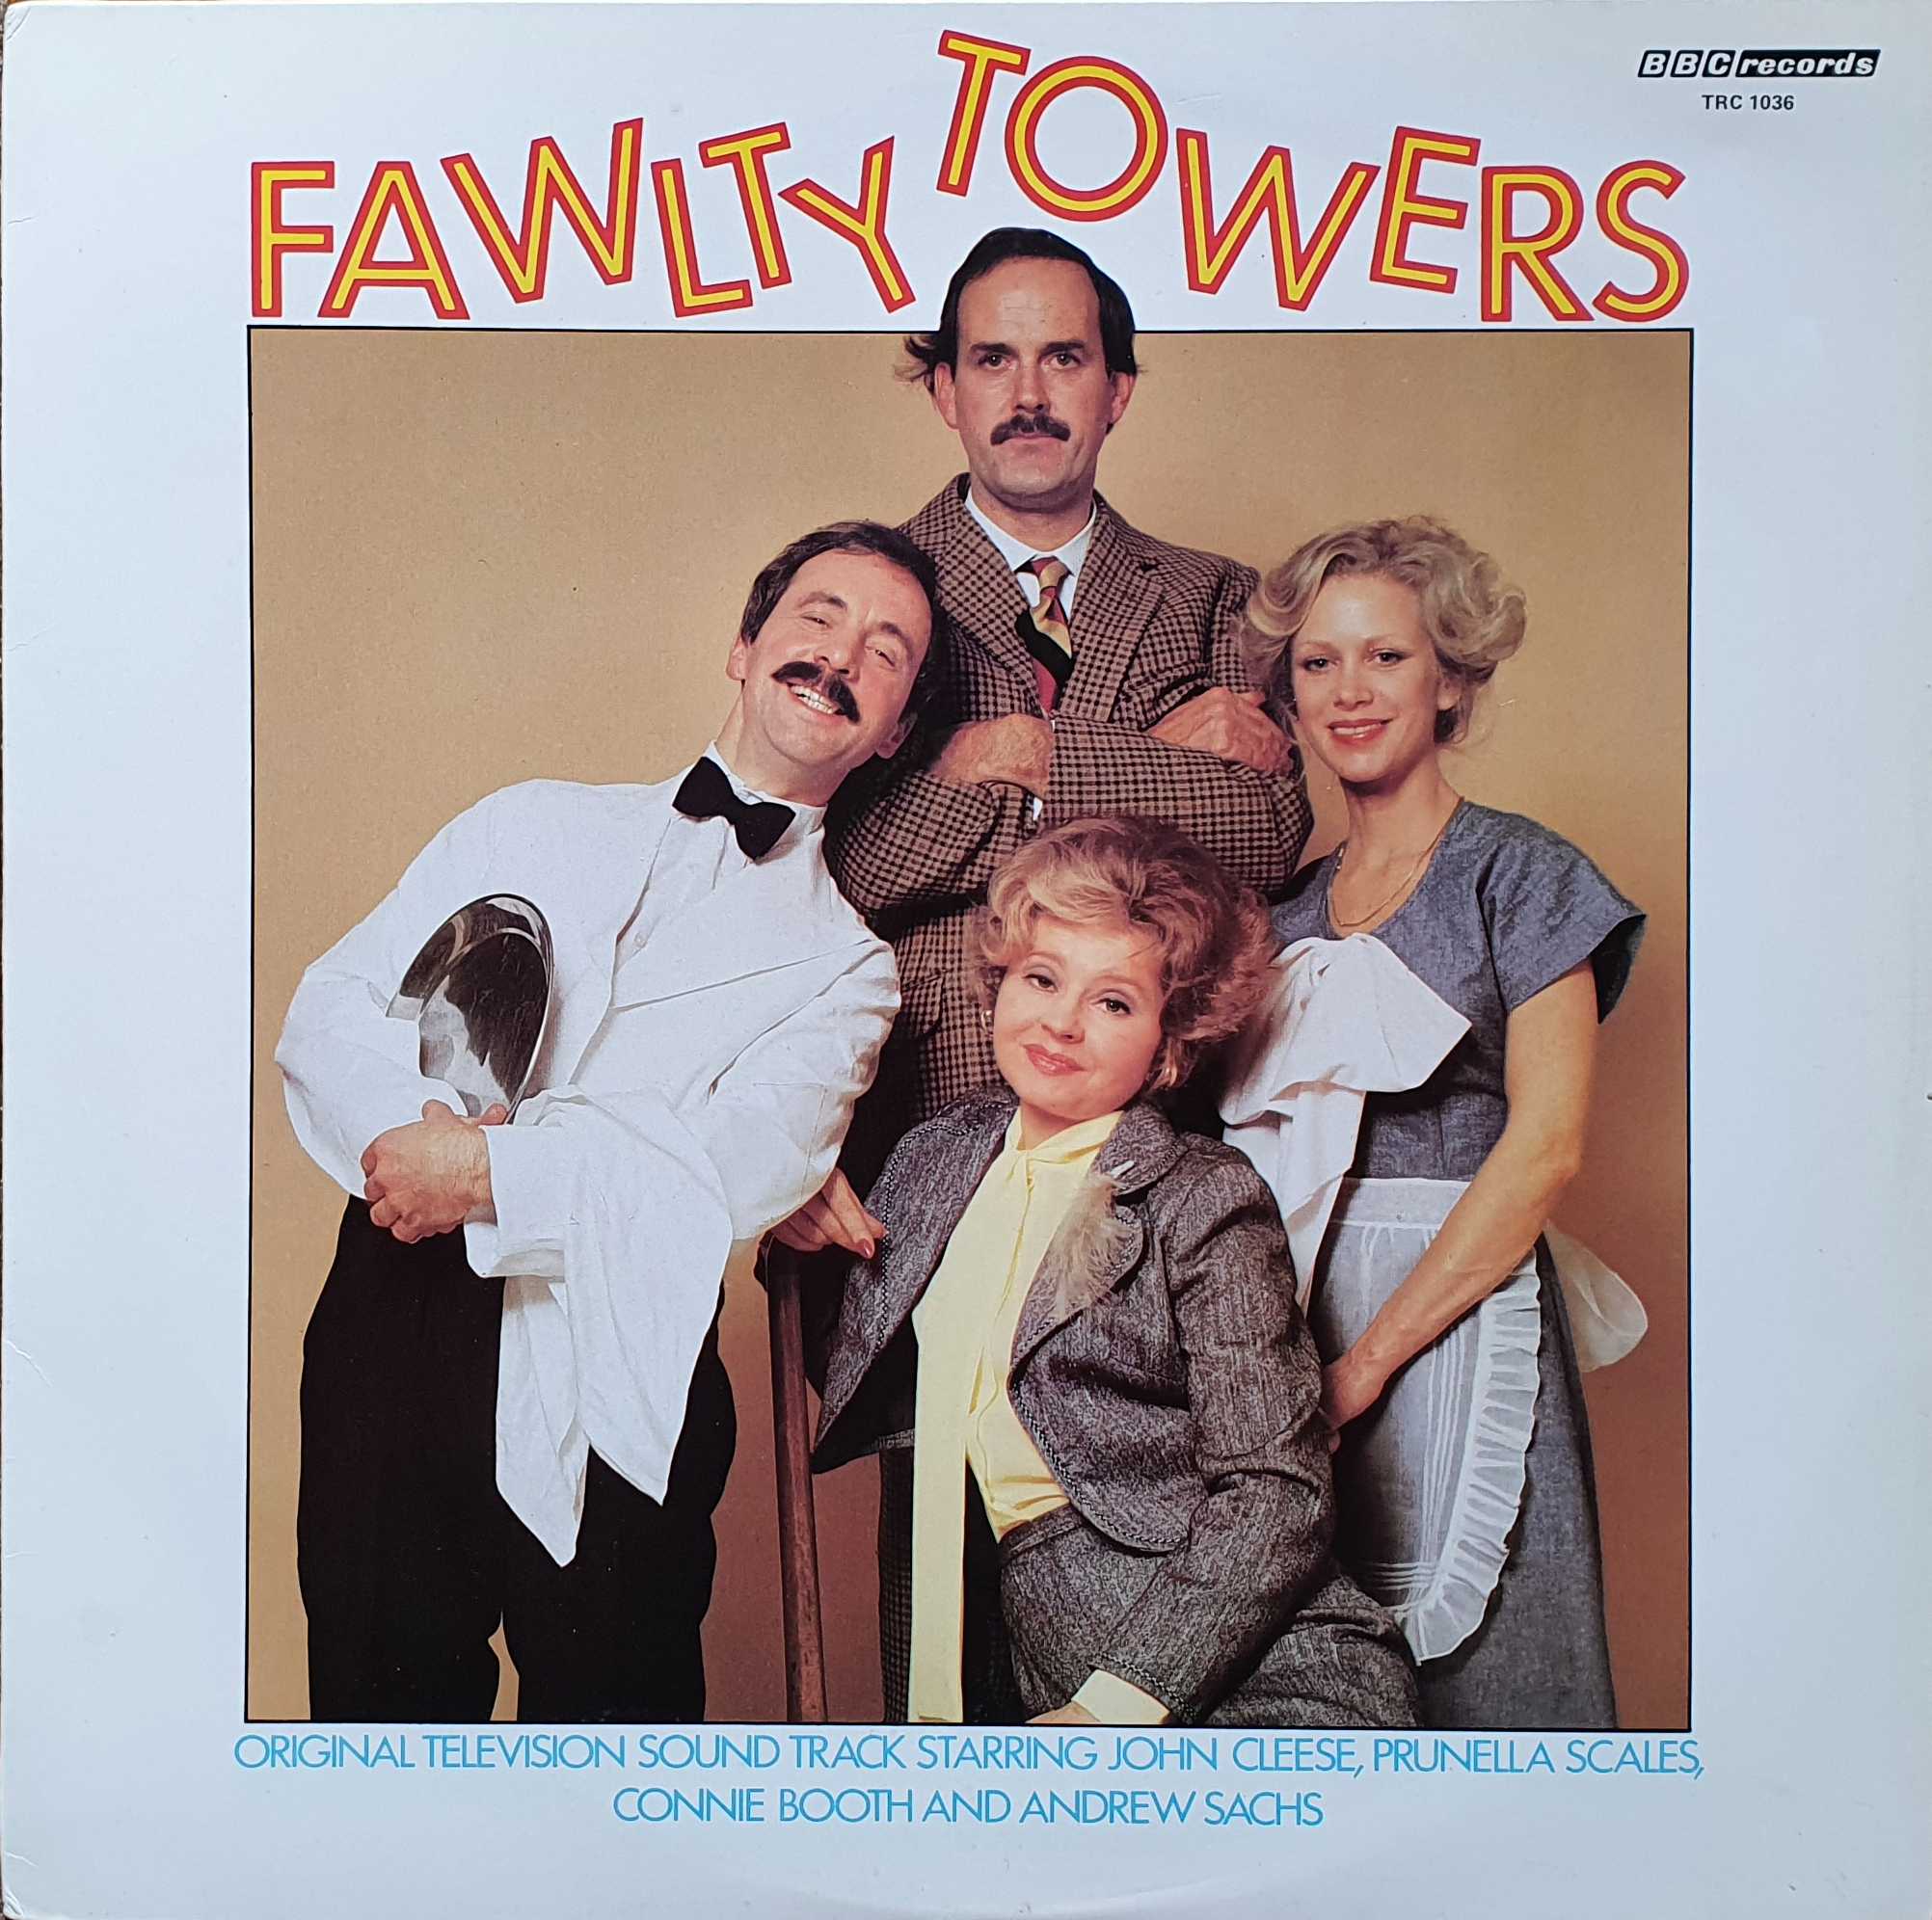 Picture of TRC - 1036 Fawlty Towers by artist John Cleese / Connie Booth from the BBC albums - Records and Tapes library